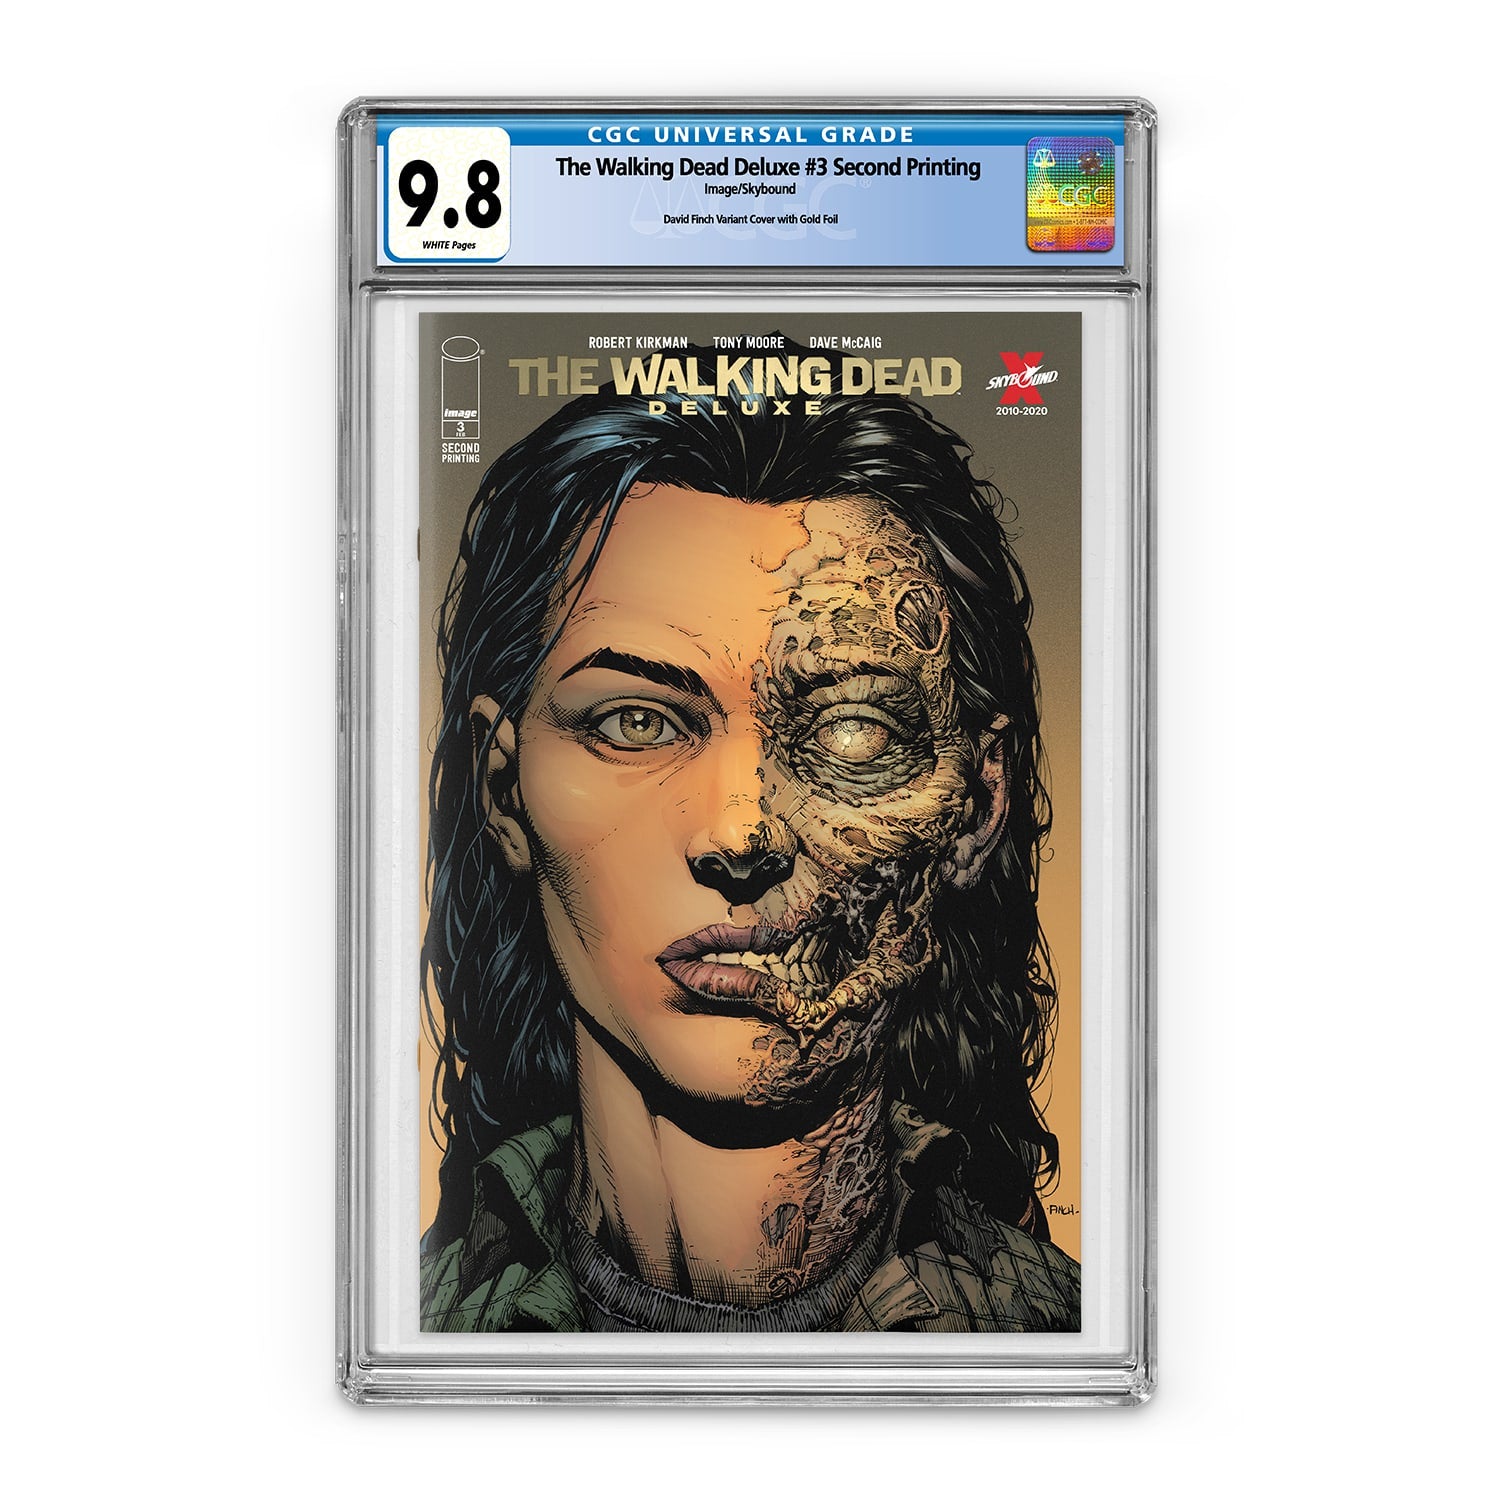 The Walking Dead Deluxe #3 Second Printing Color with Gold Foil Logo CGC 9.8